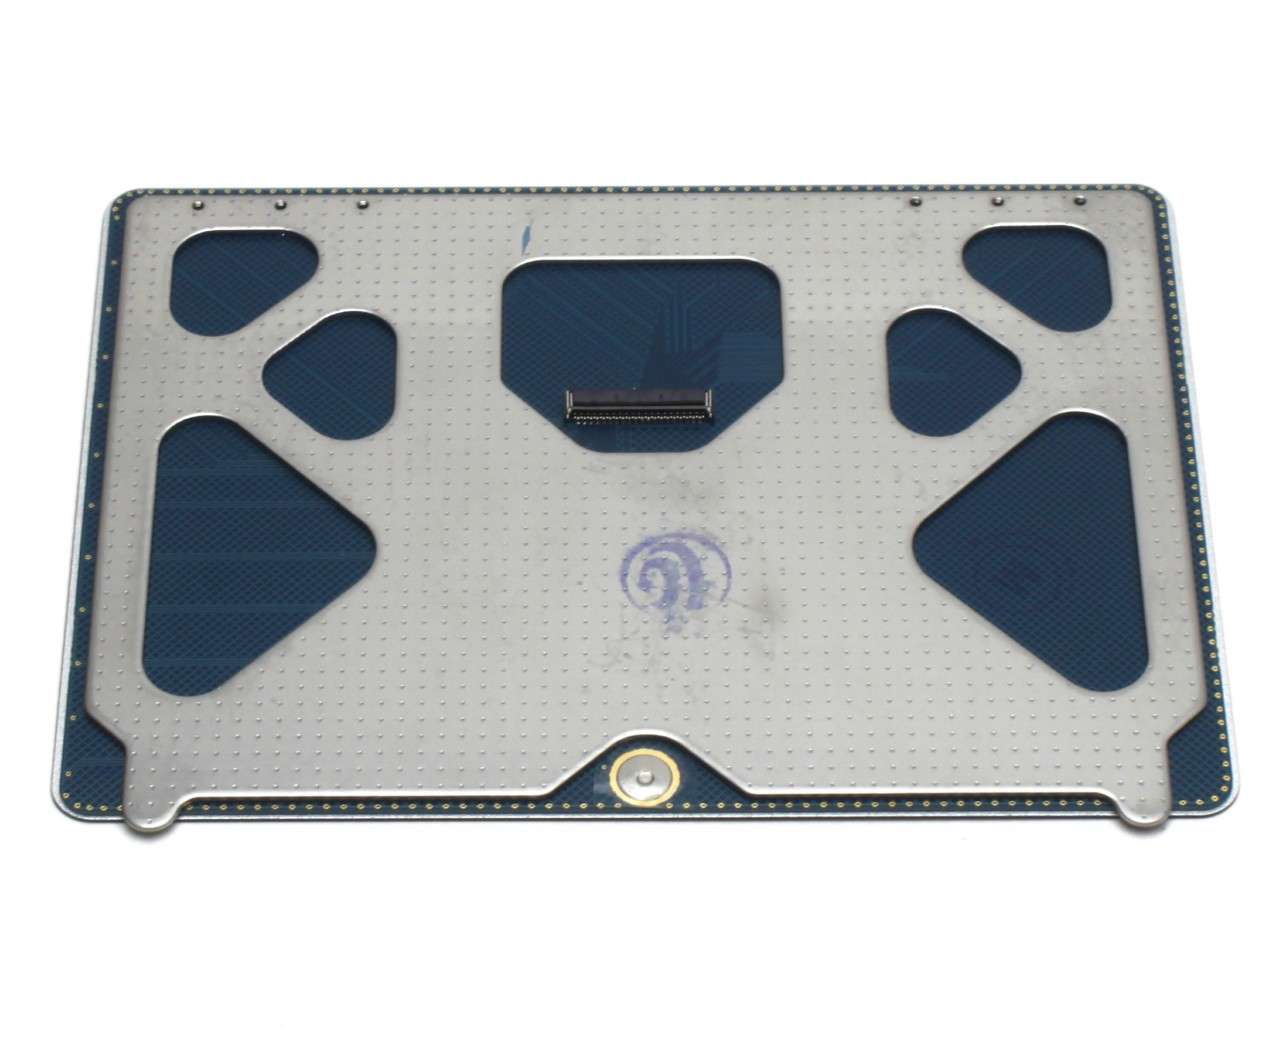 Touchpad Apple Macbook Pro Unibody 13 A1286 Mid 2010 Trackpad image